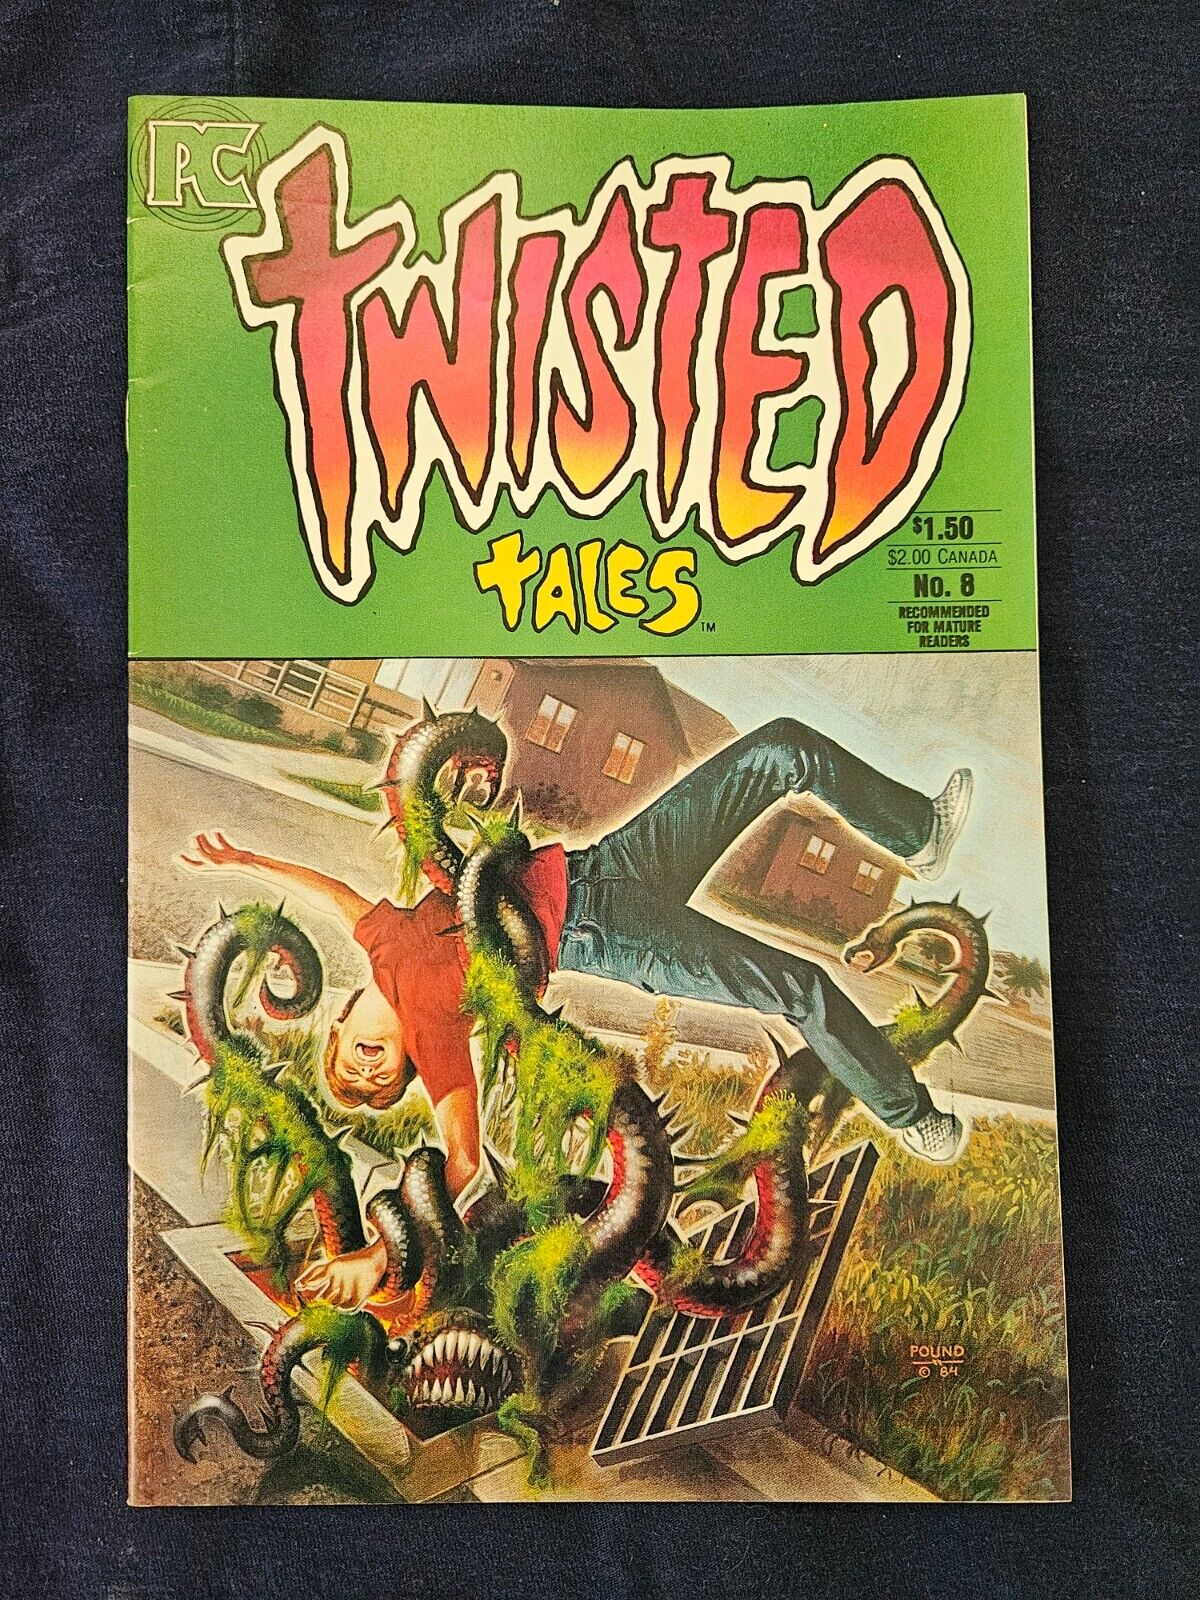 Twisted Tales #8 (Horror), Pacific Comics 1984. Final issue by Pacific Comics.